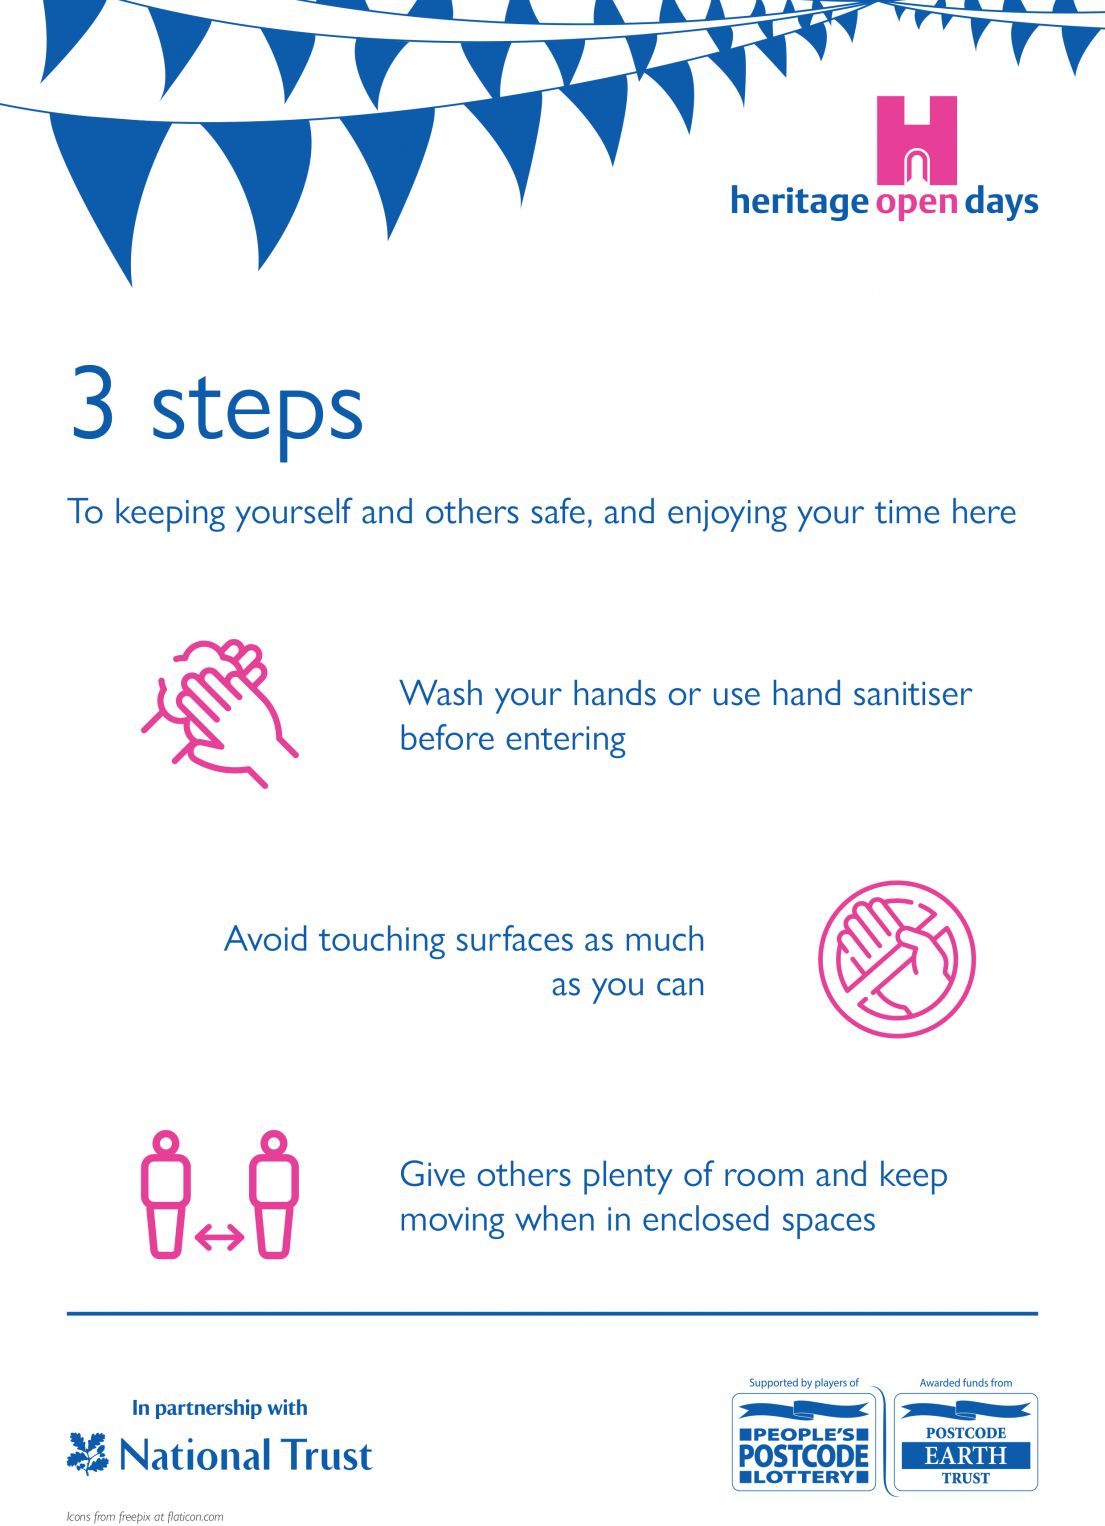 3 Steps poster - displaying how events could be COVID safe